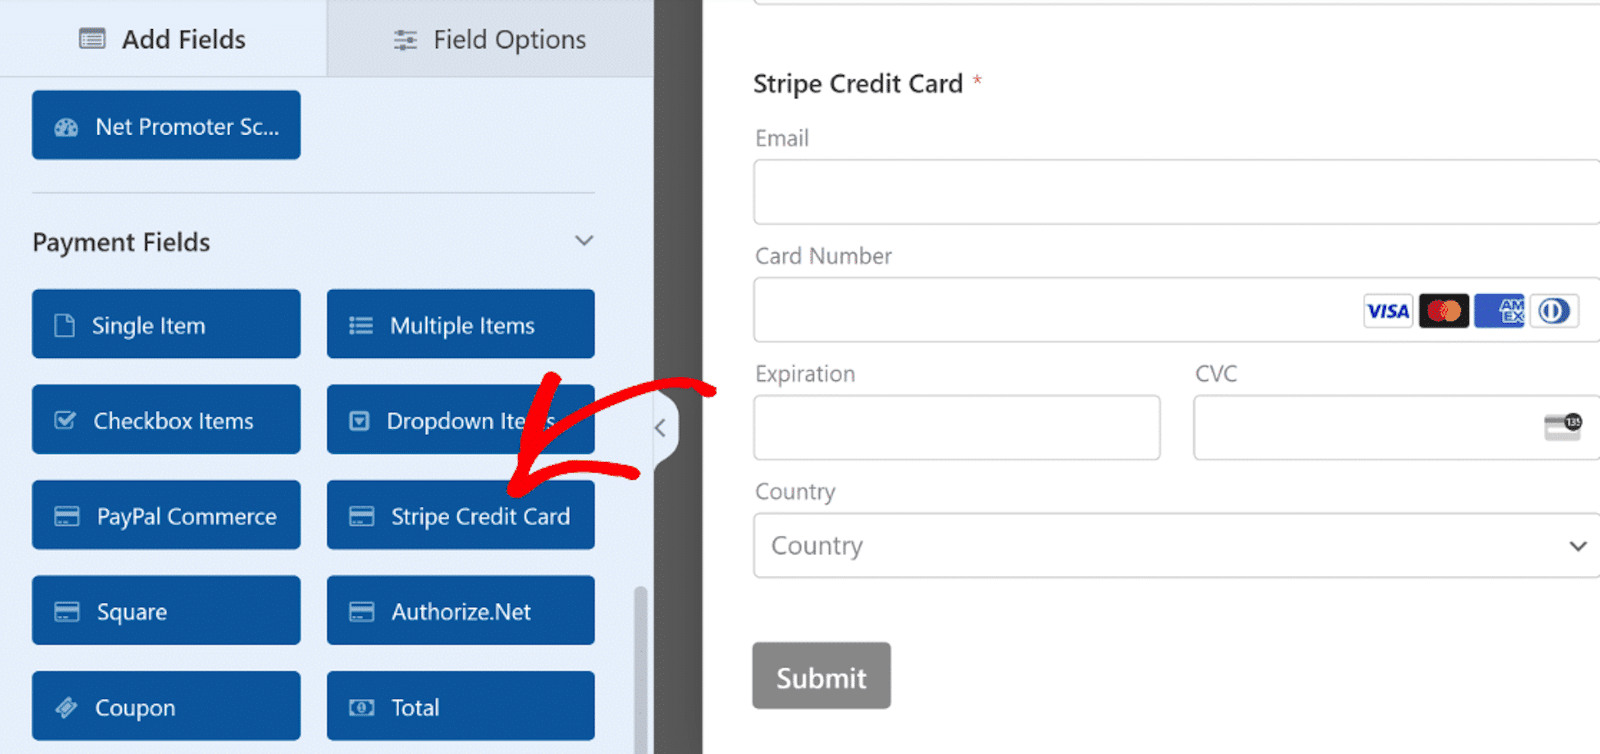 Adding the Stripe Credit Card field to an order form